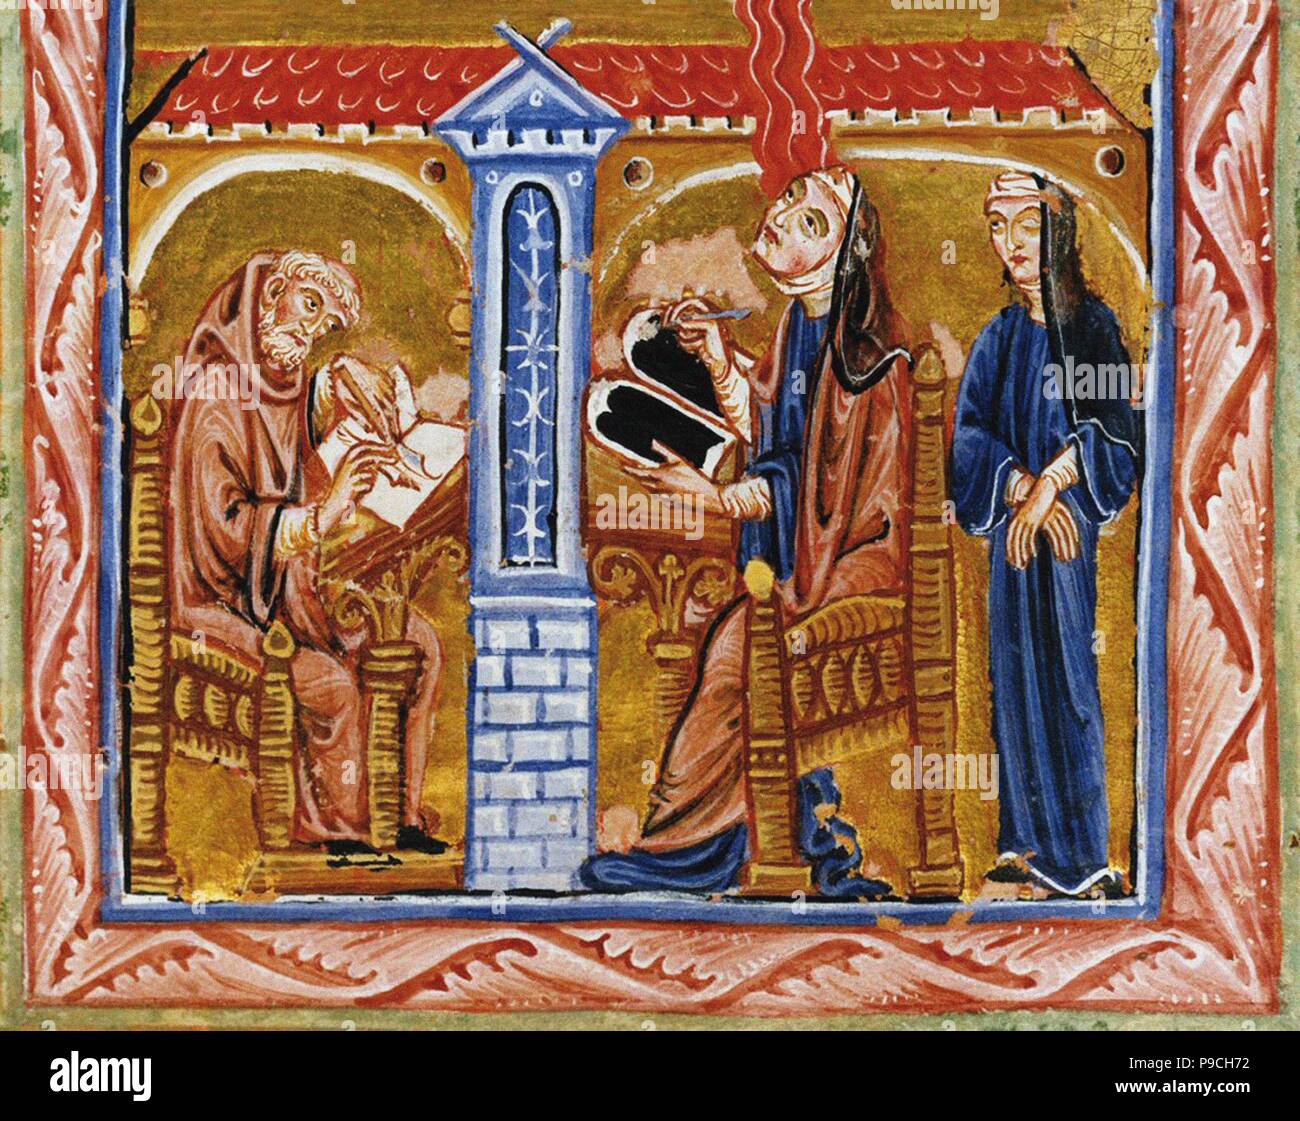 Hildegard receives a vision in the presence of her secretary Volmar and her confidante Richardis. Museum: Biblioteca Statale, Lucca. Stock Photo